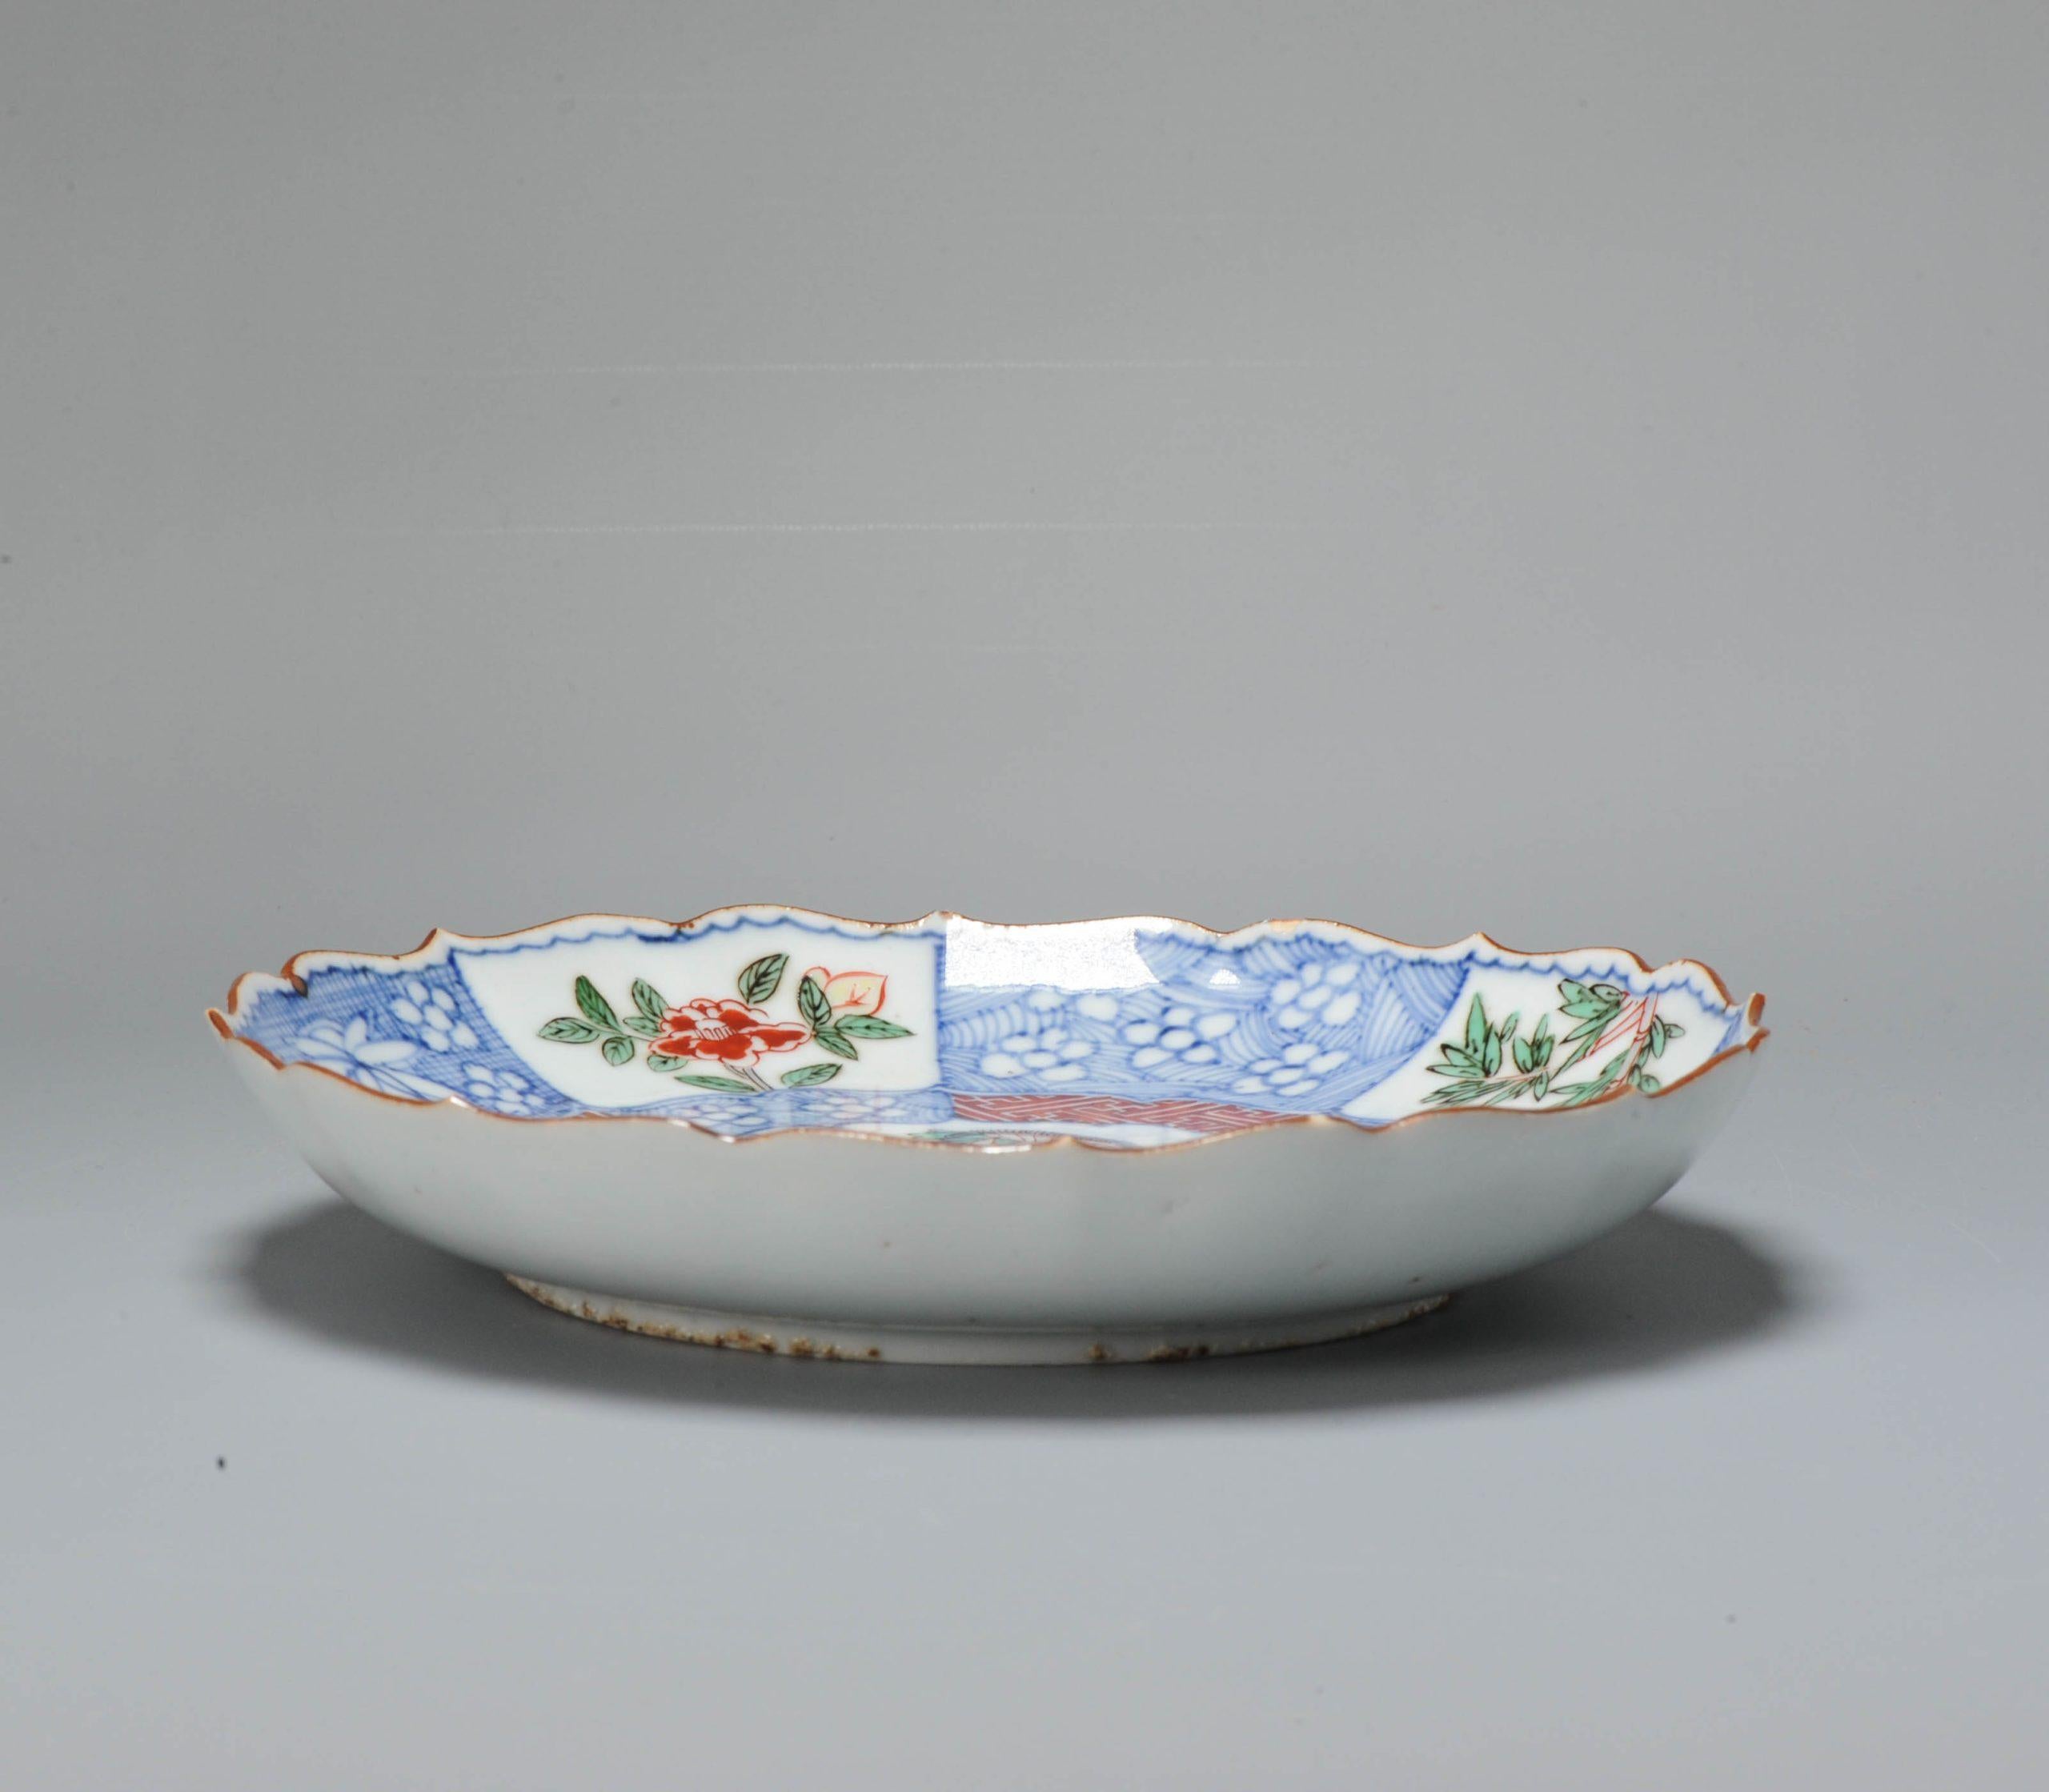 Japanese in Chinese Ming style. We think its 17th ot 18th c

Chenghua mark at the base.

Additional information:
Material: Porcelain & Pottery
Region of Origin: China
Emperor: Chongzhen (1627-1644), Tianqi (1620-1627)
Period: 17/18th century
Age: